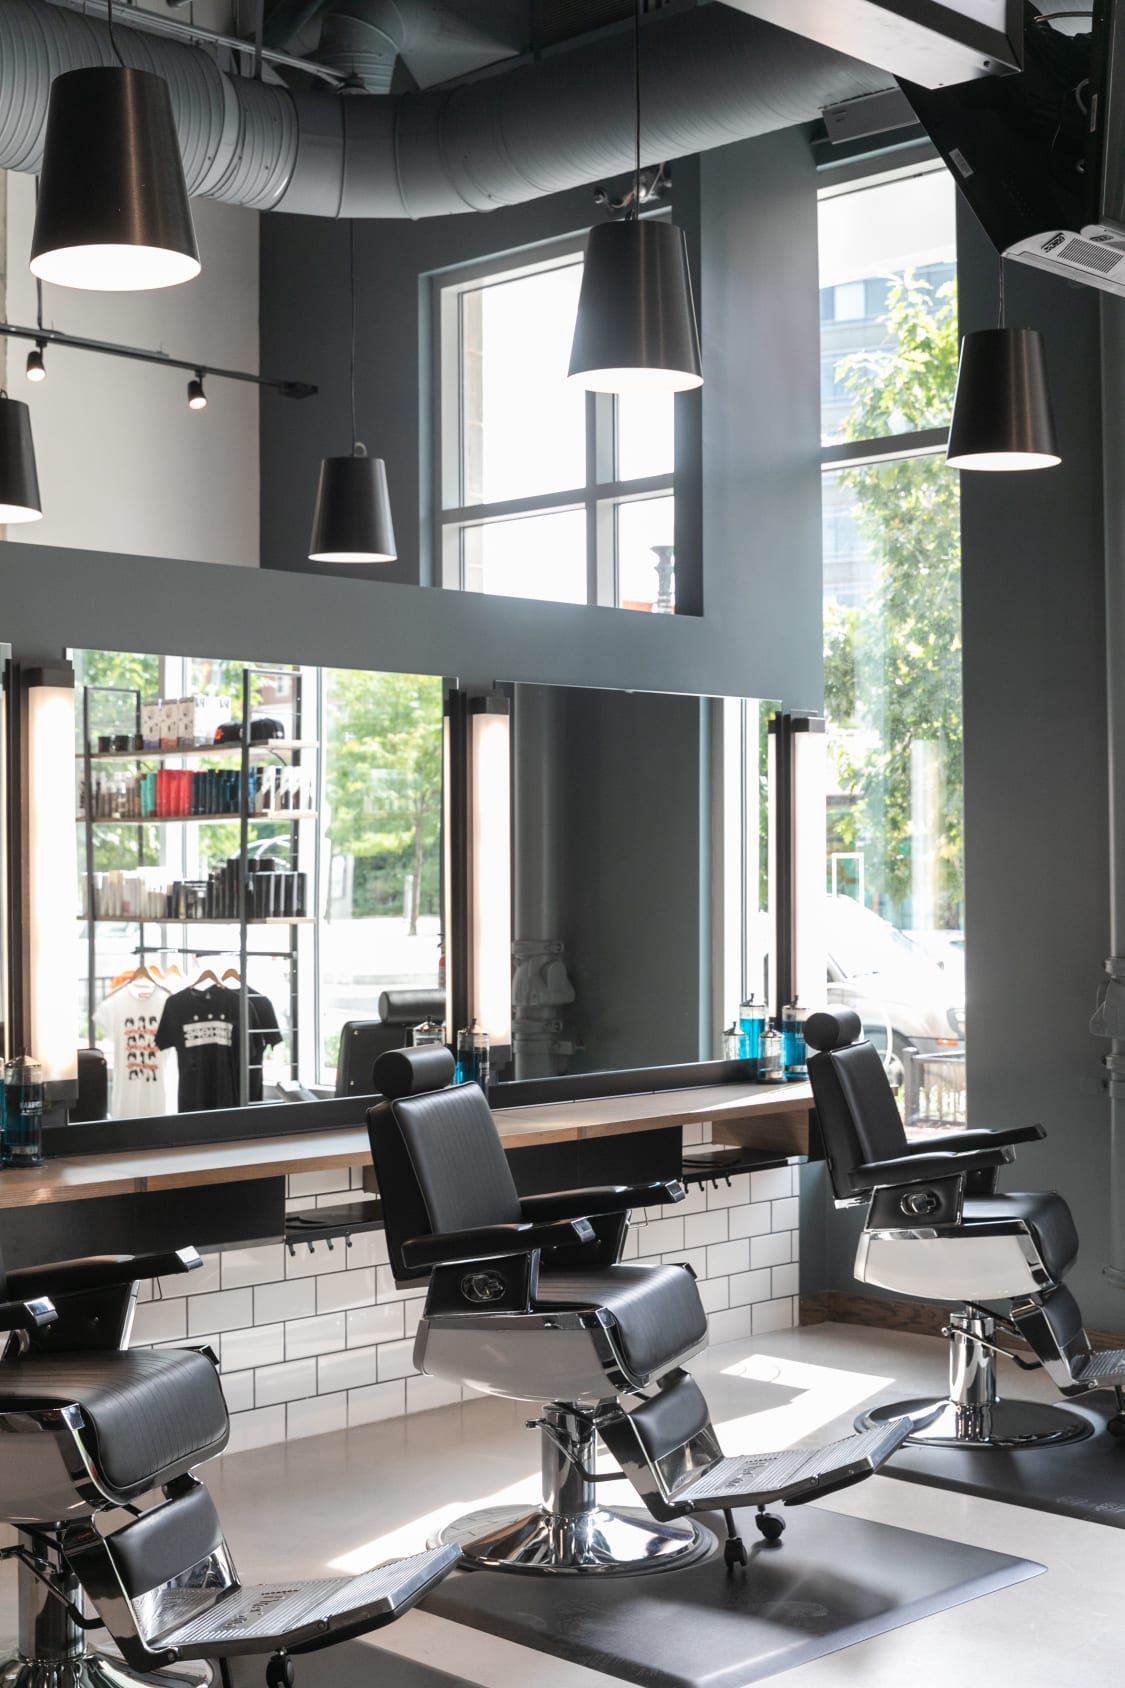 Bishops Haircuts - Navy Yard: Read Reviews and Book Classes on ClassPass